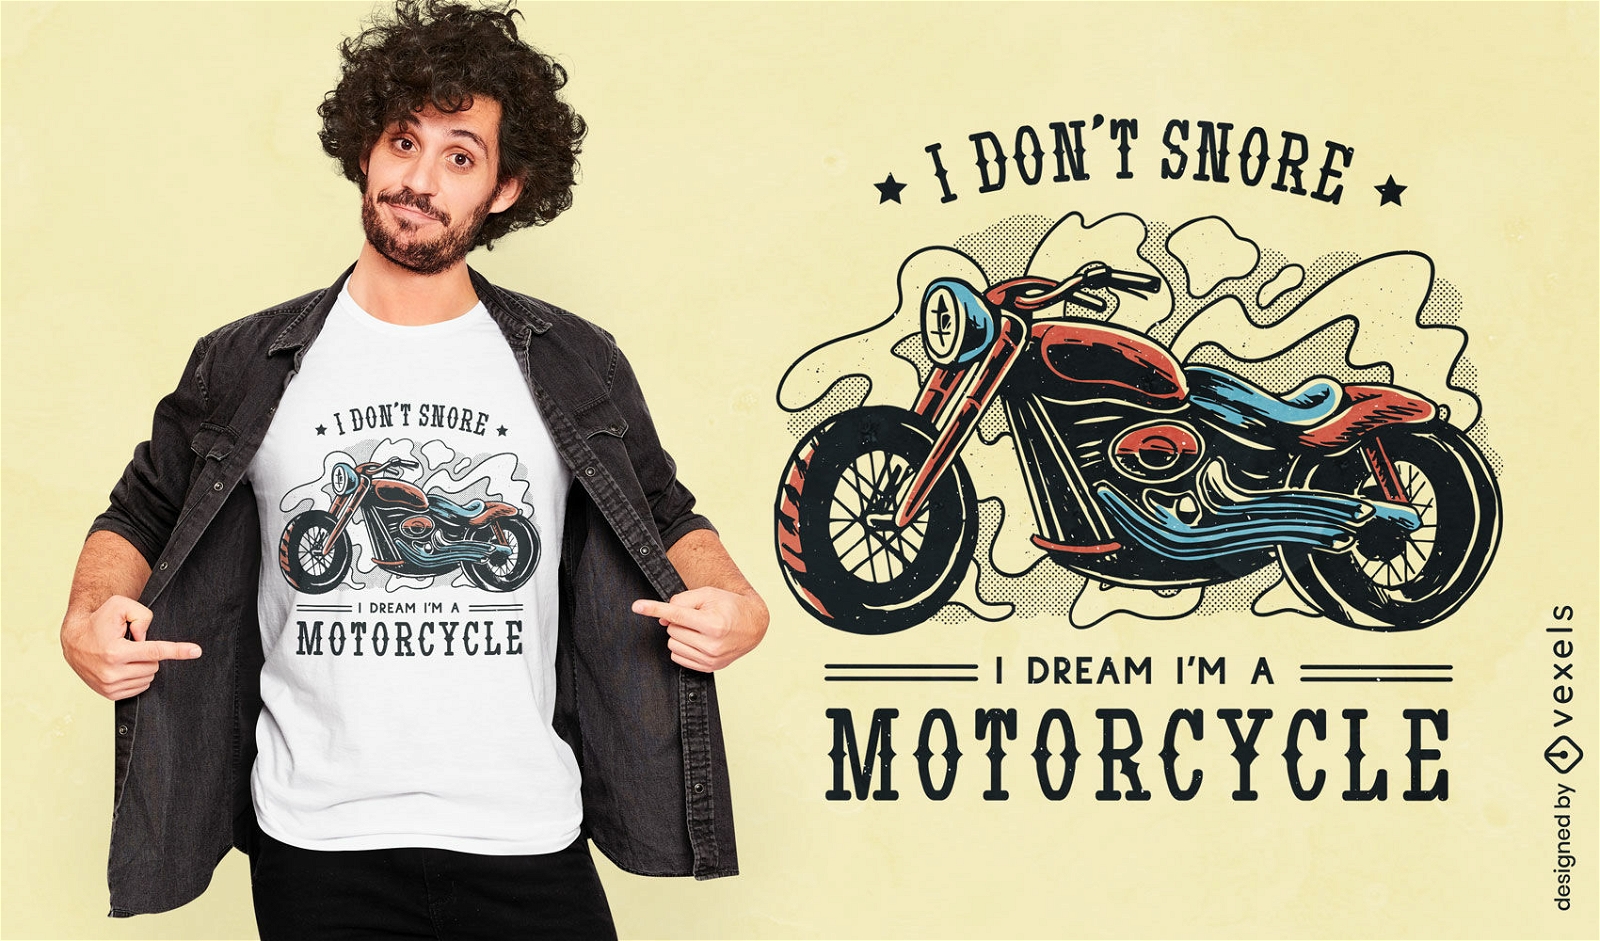 Funny motorcycle quote t-shirt design